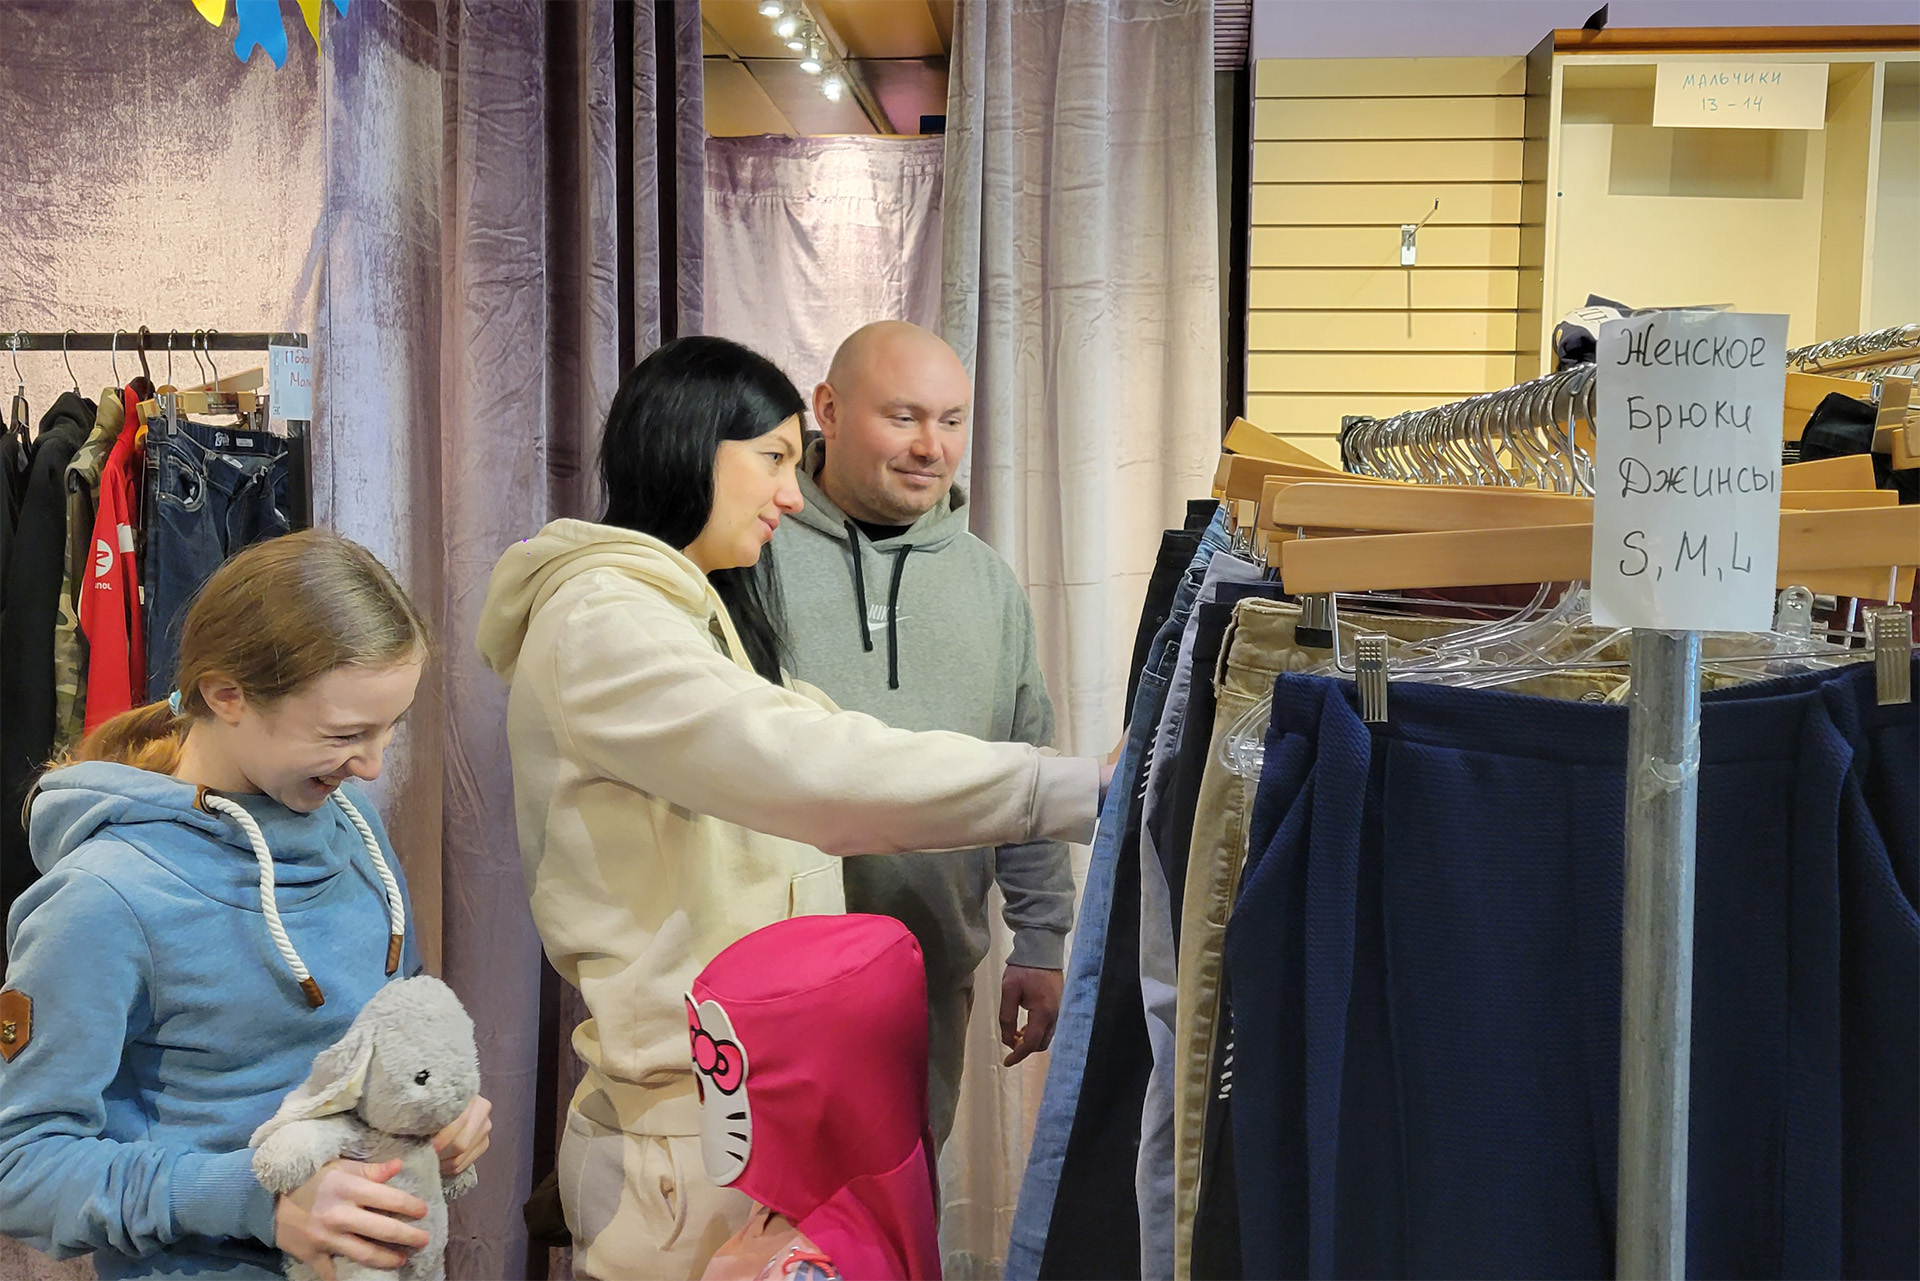 A family of four looks at clothes at the donations centre.